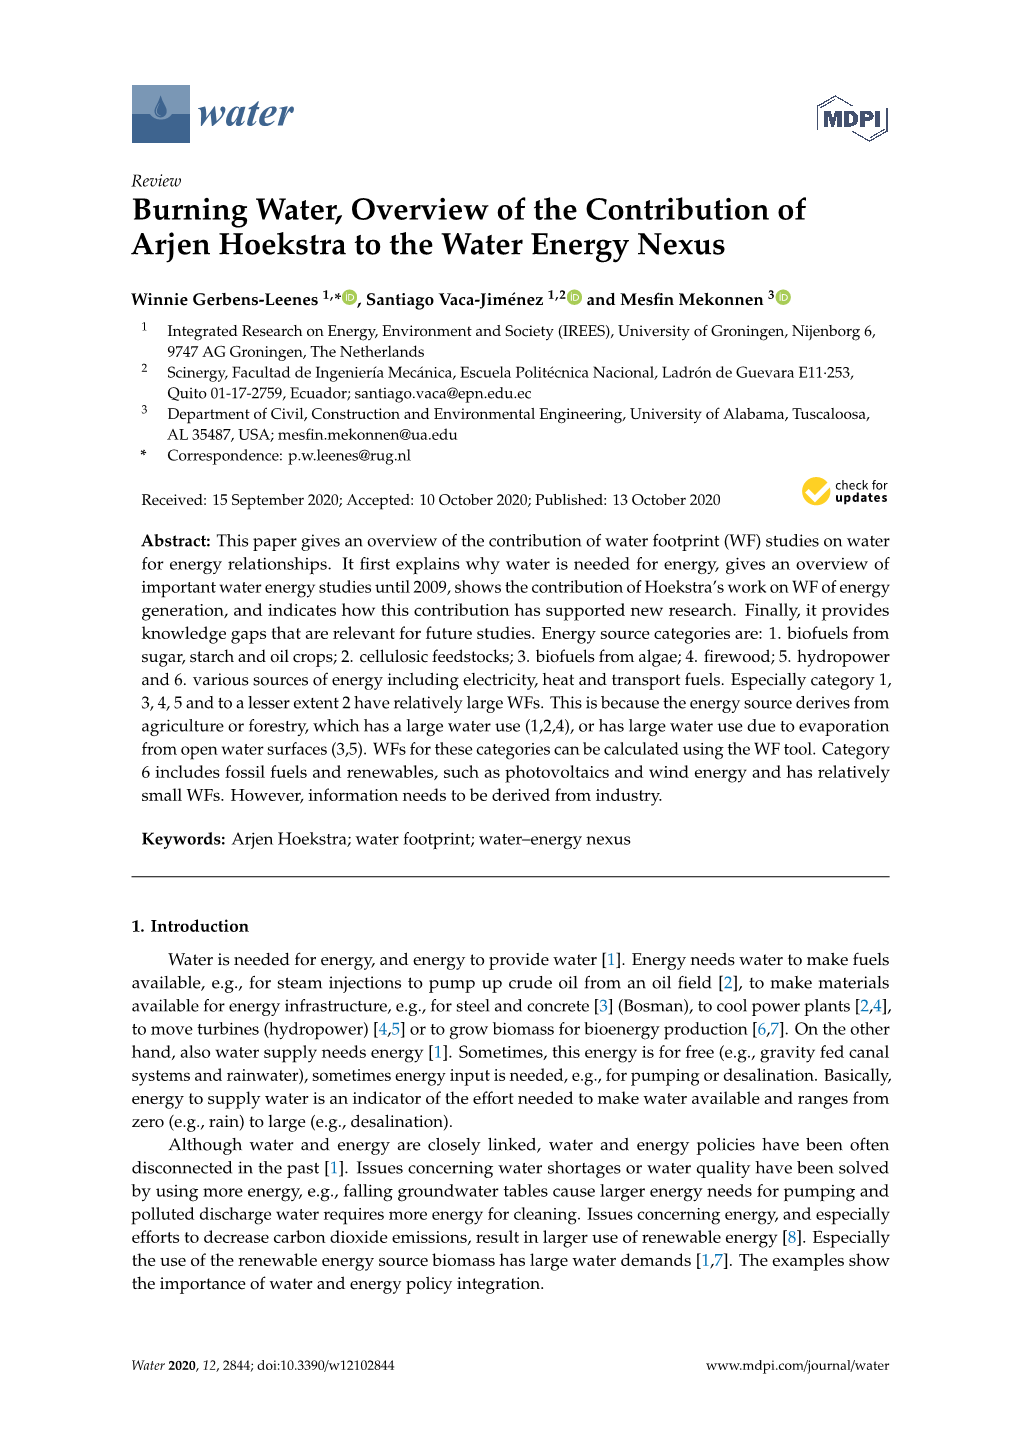 Burning Water, Overview of the Contribution of Arjen Hoekstra to the Water Energy Nexus